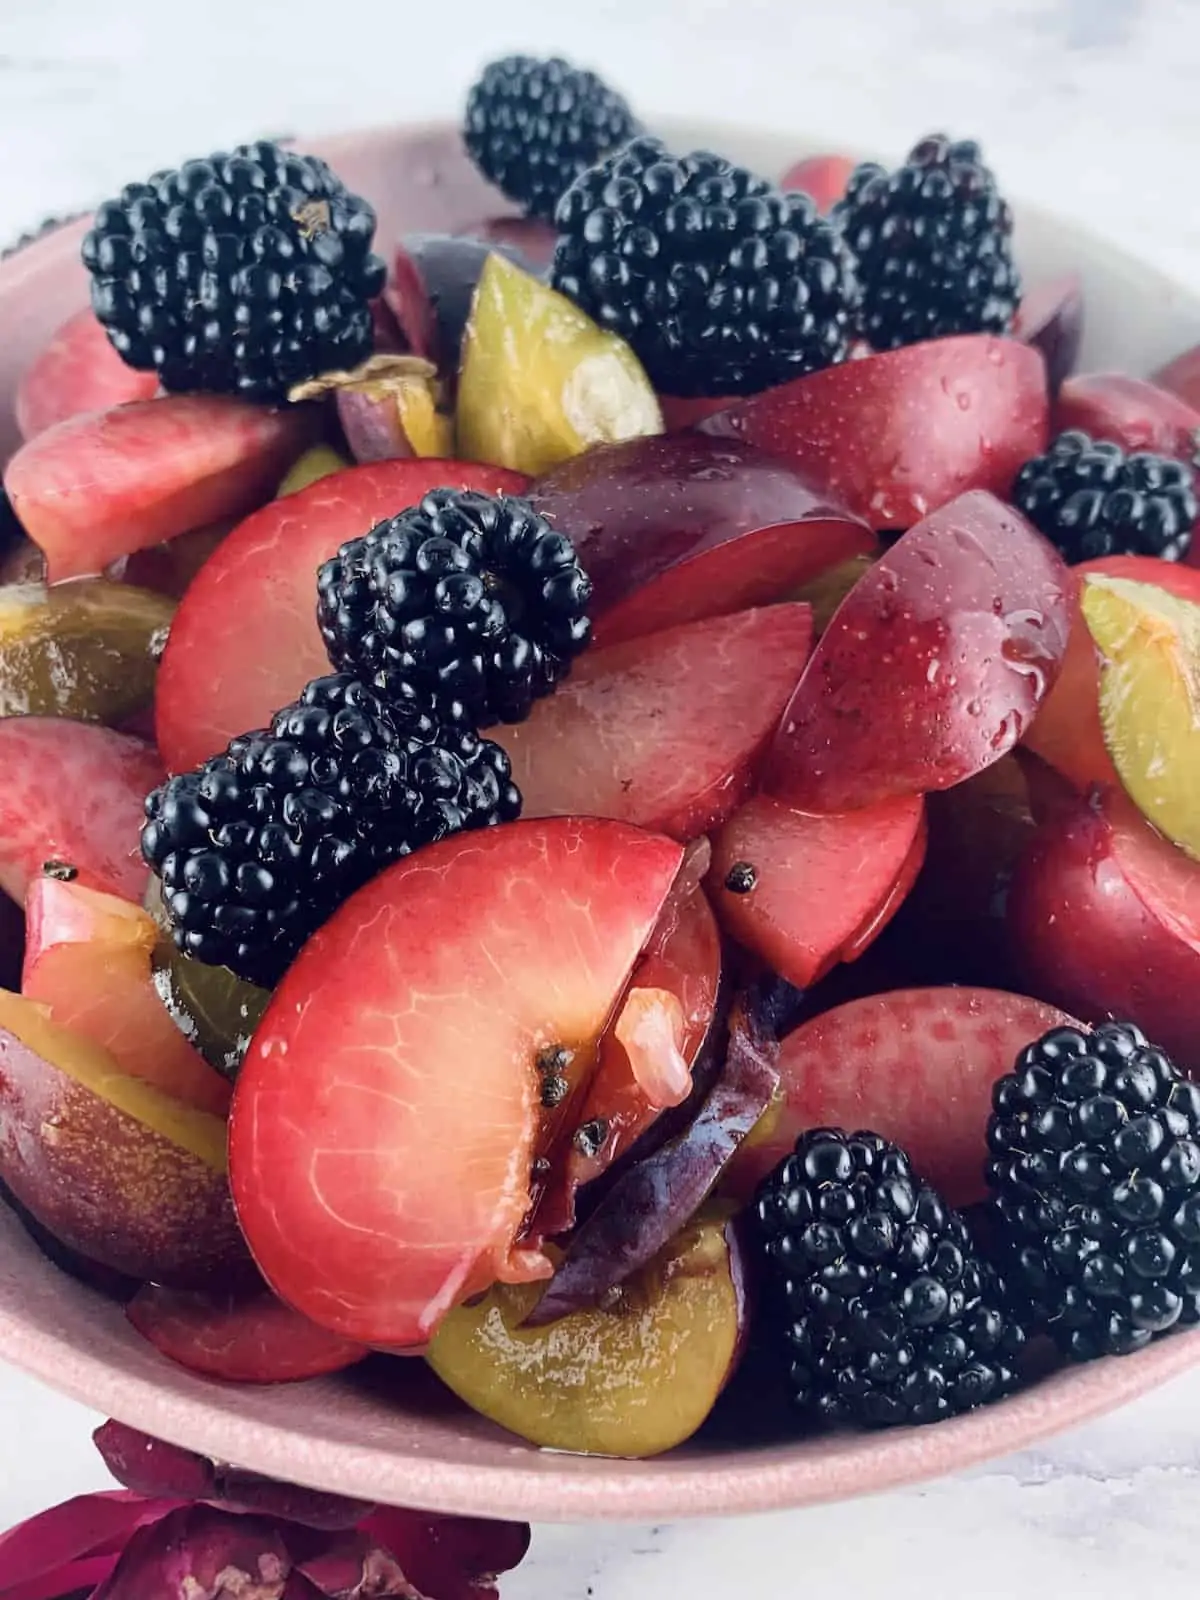 Plum Salad with Blackberries in a pink bowl with a rose bottom left corner.